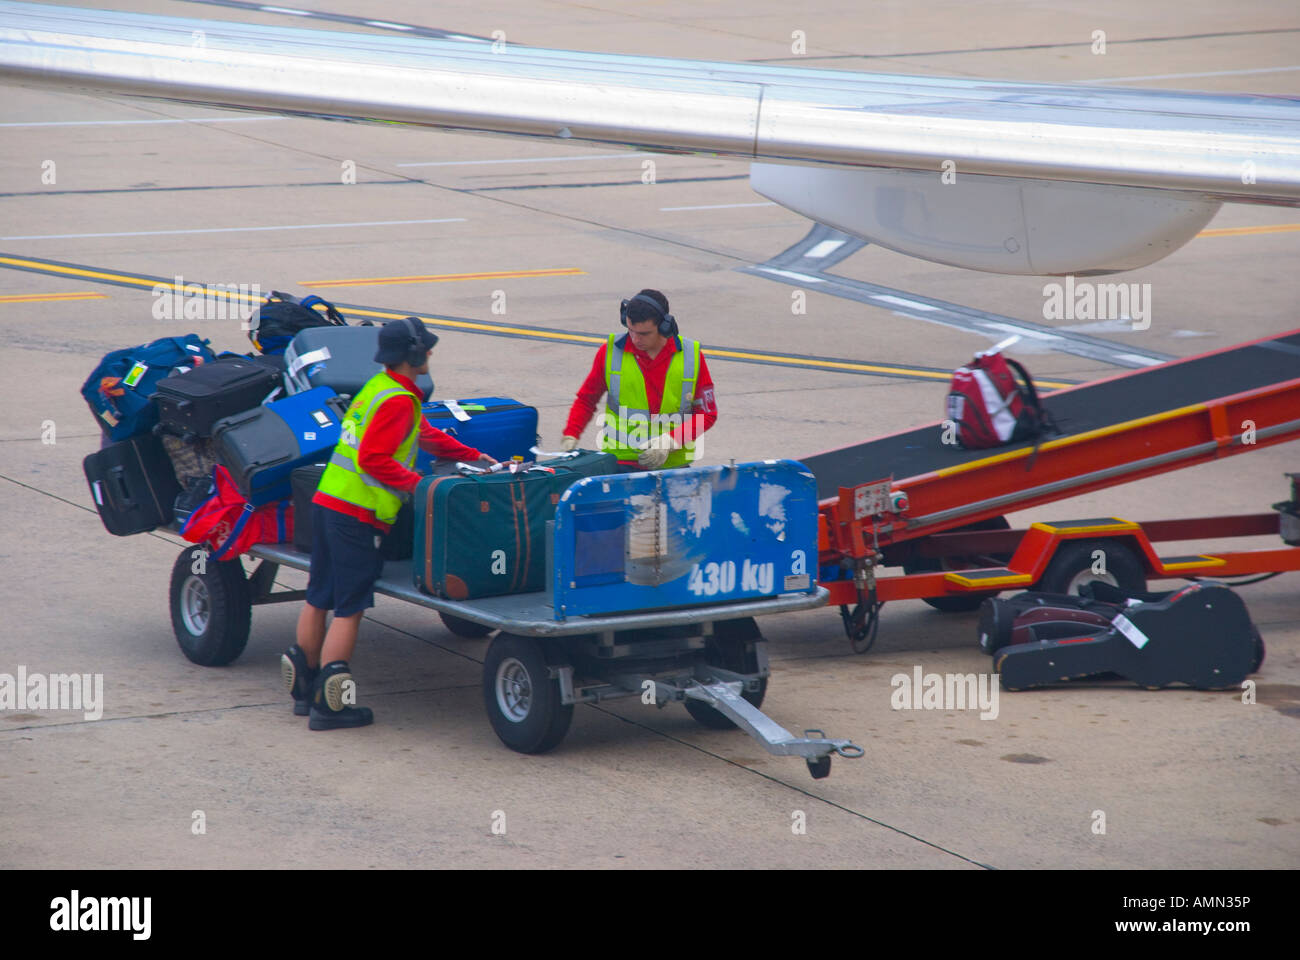 Baggage handlers loading an aircraft in Sydney Australia Stock Photo